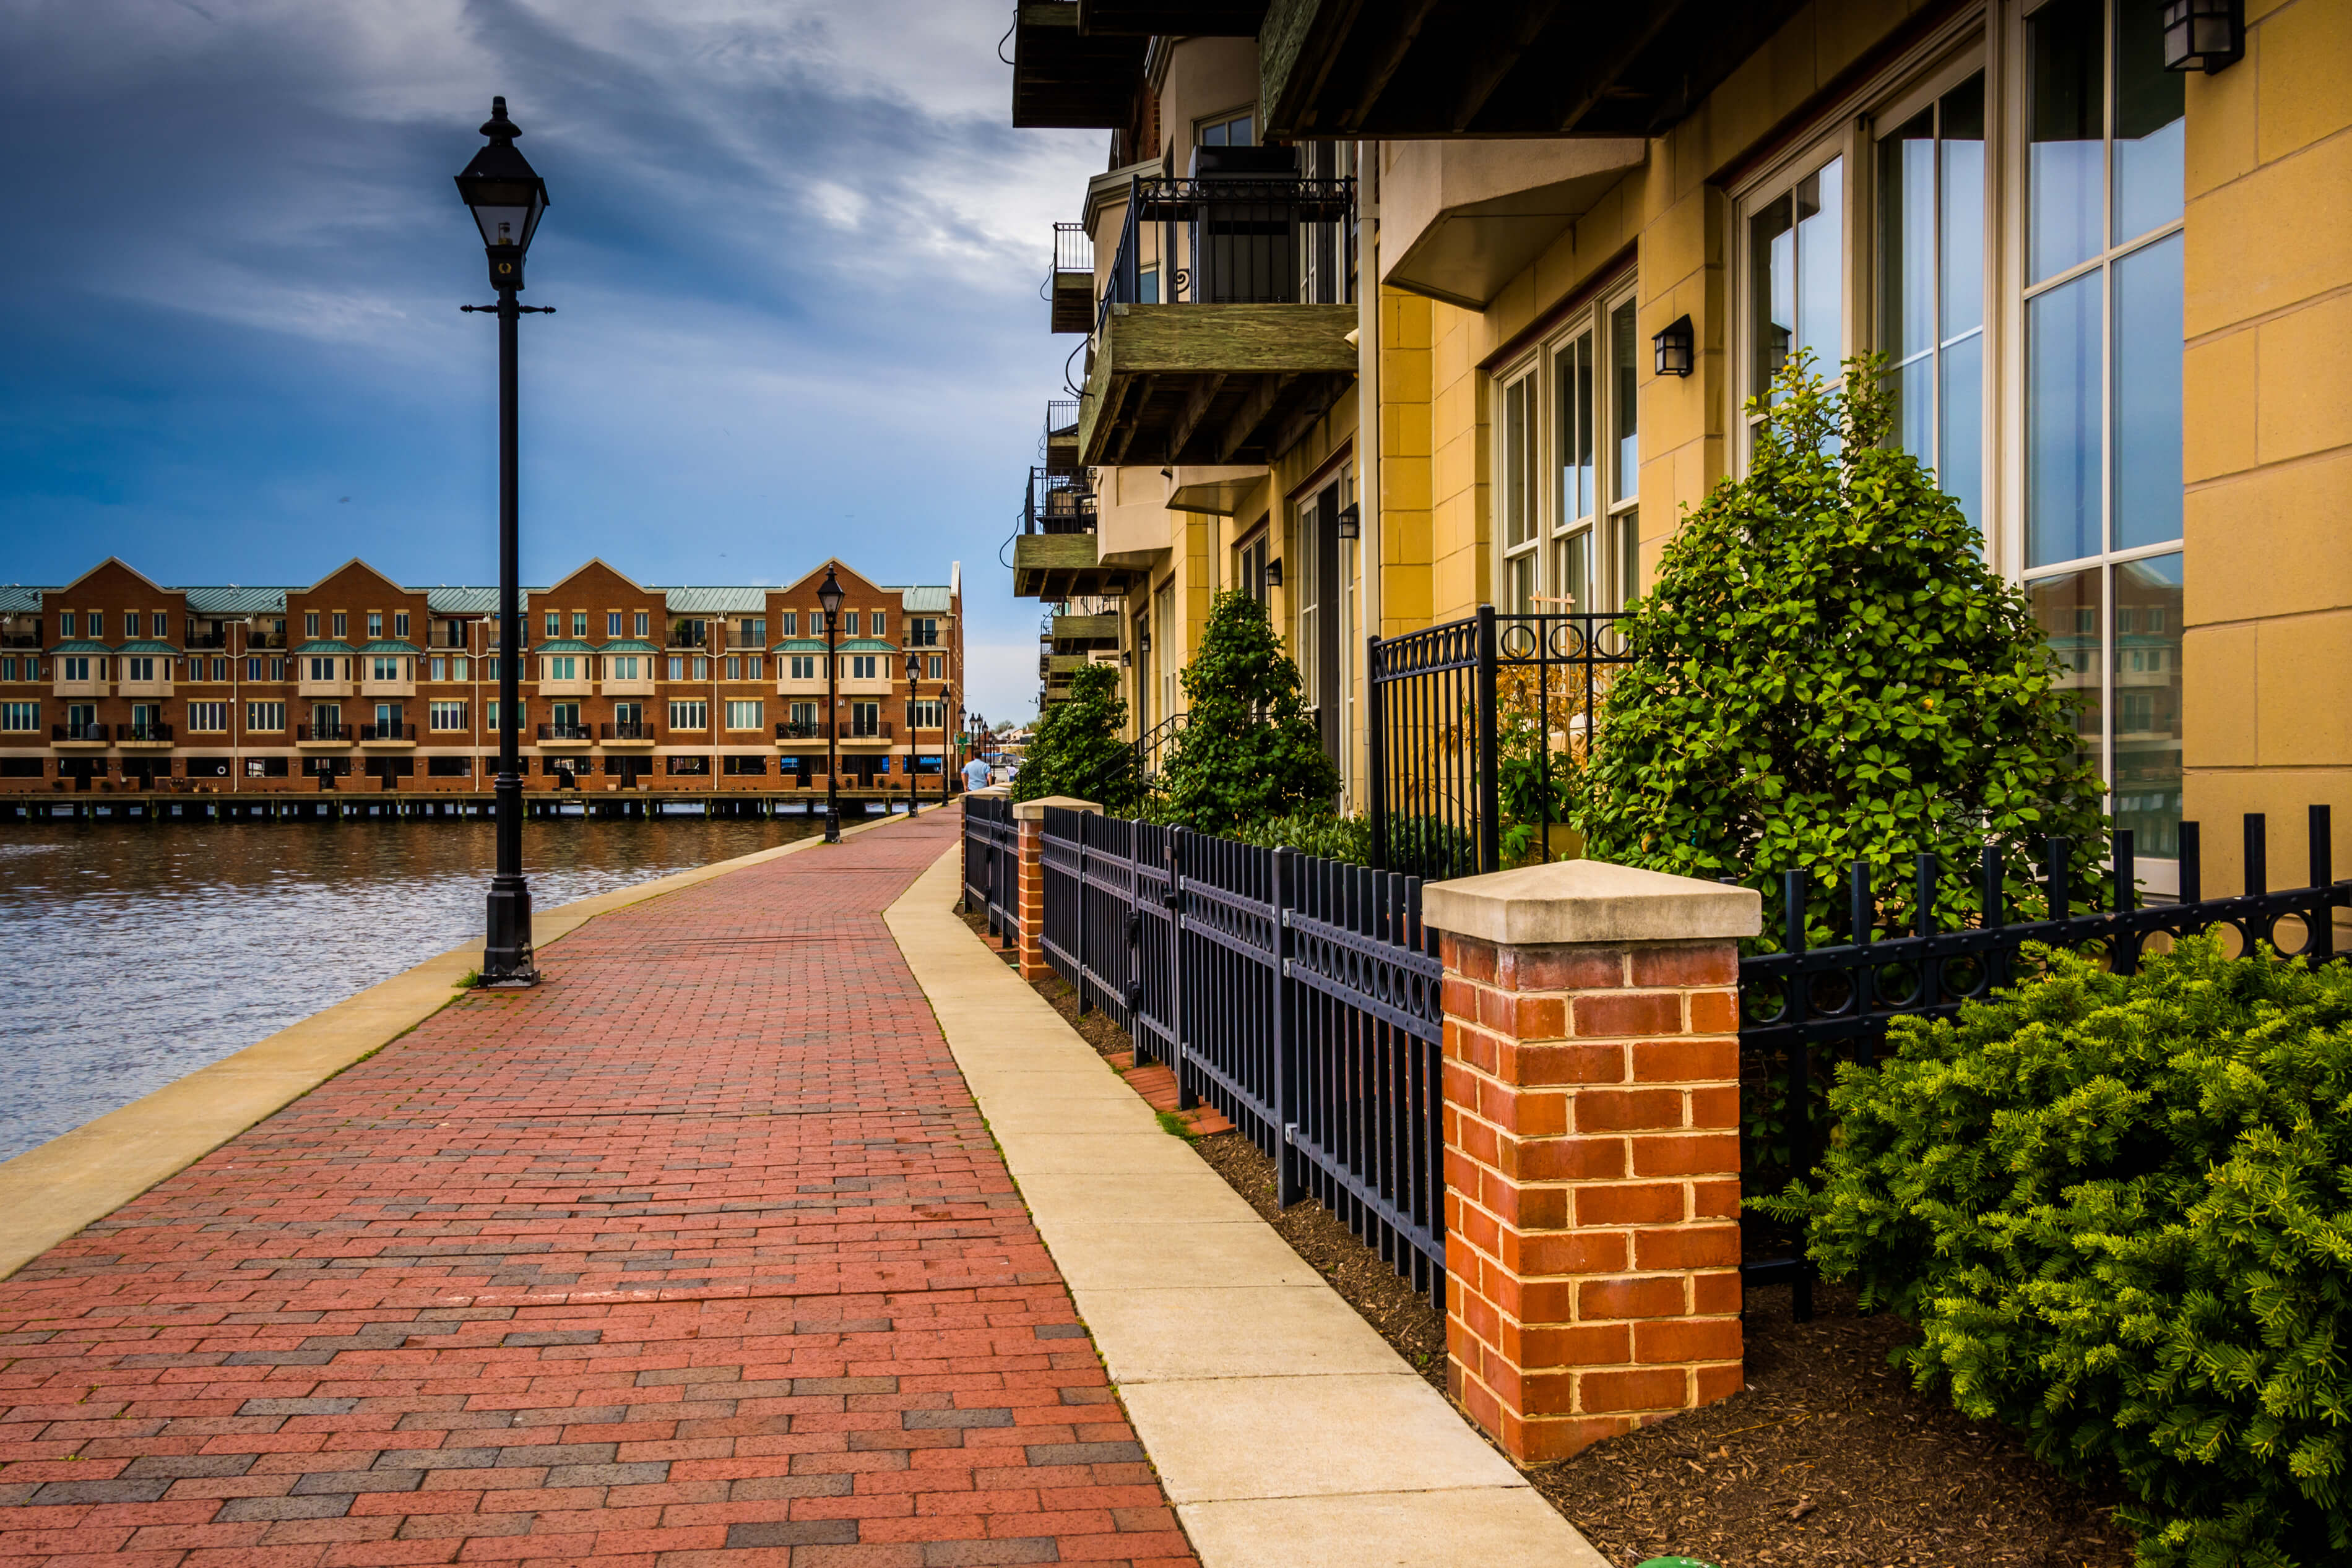 Homes on the waterfront in Fells Point, Baltimore, Maryland. Header